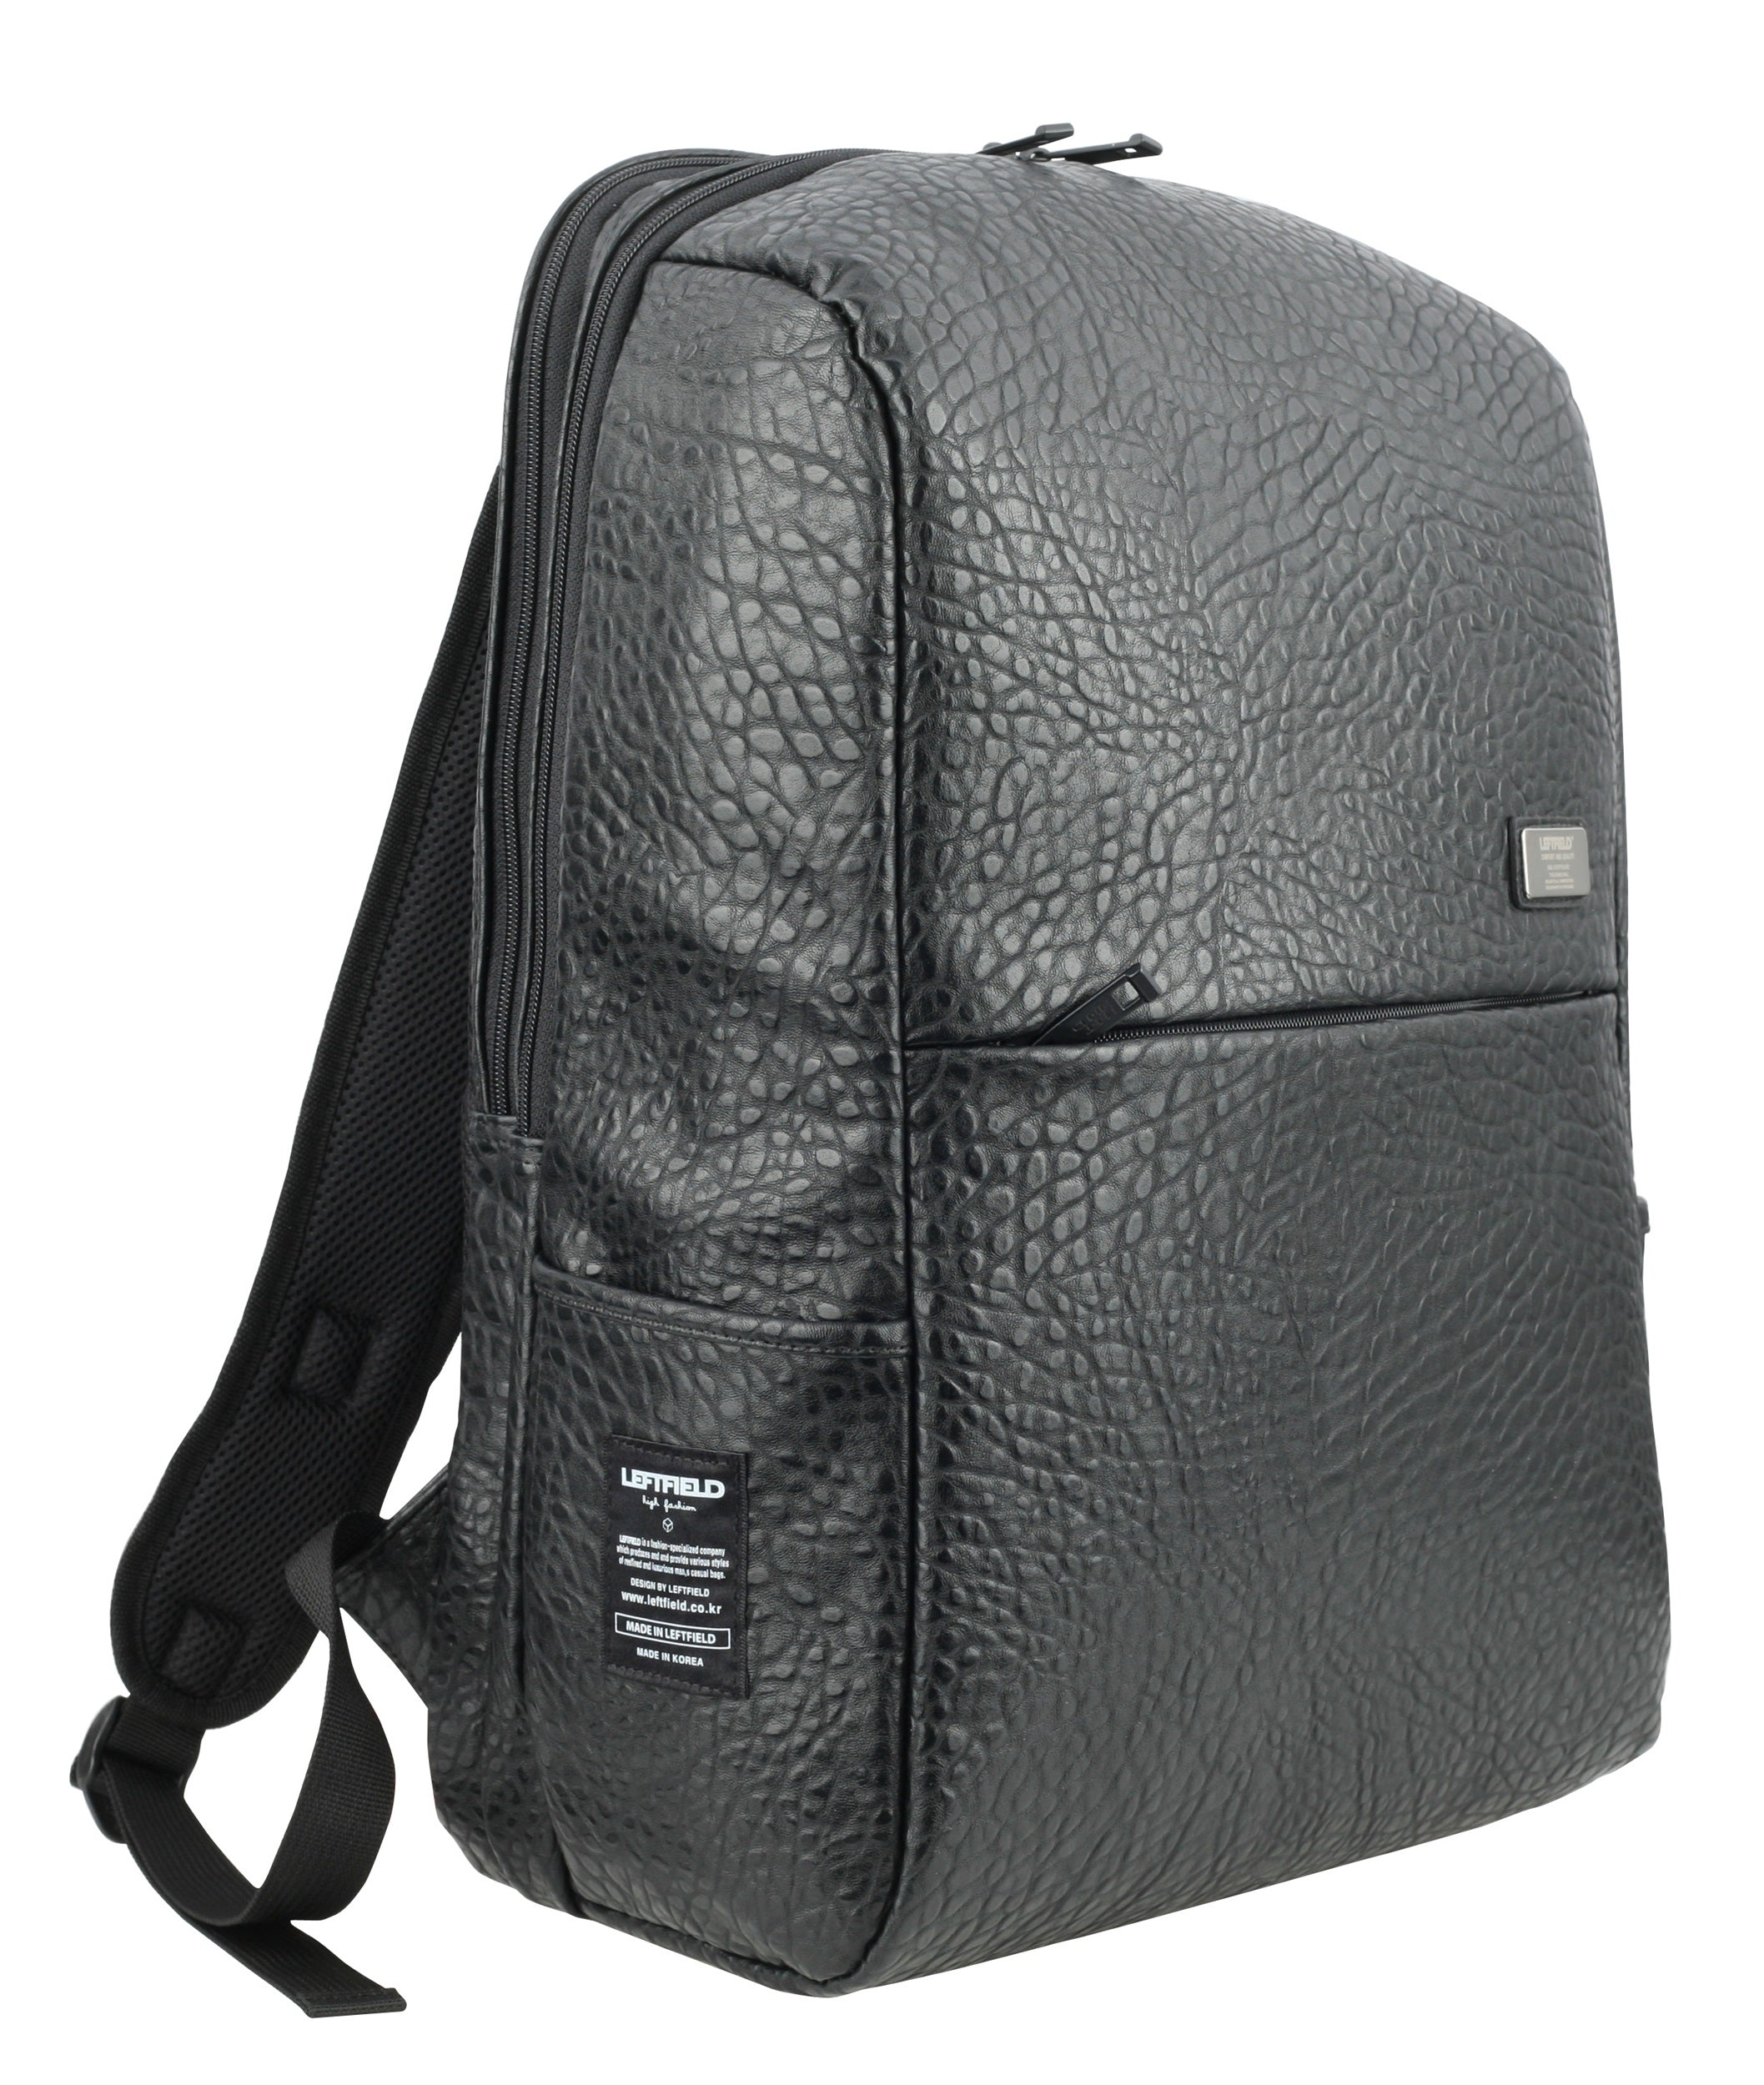 Black Faux Leather Casual Business Backpacks